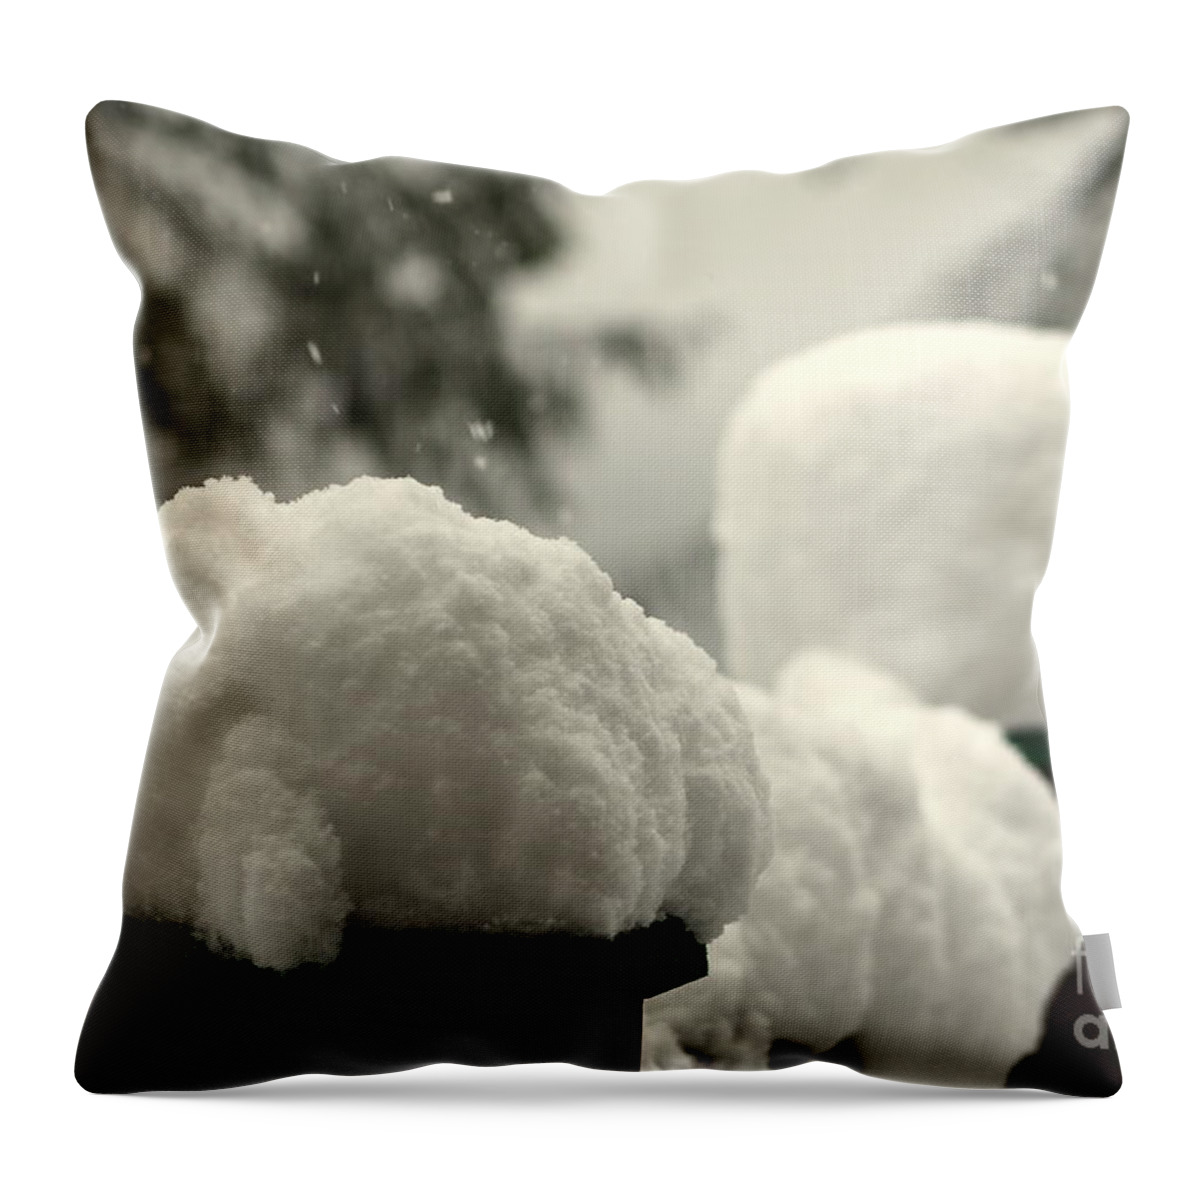 Snow Throw Pillow featuring the photograph Snowy Posts by Leone Lund